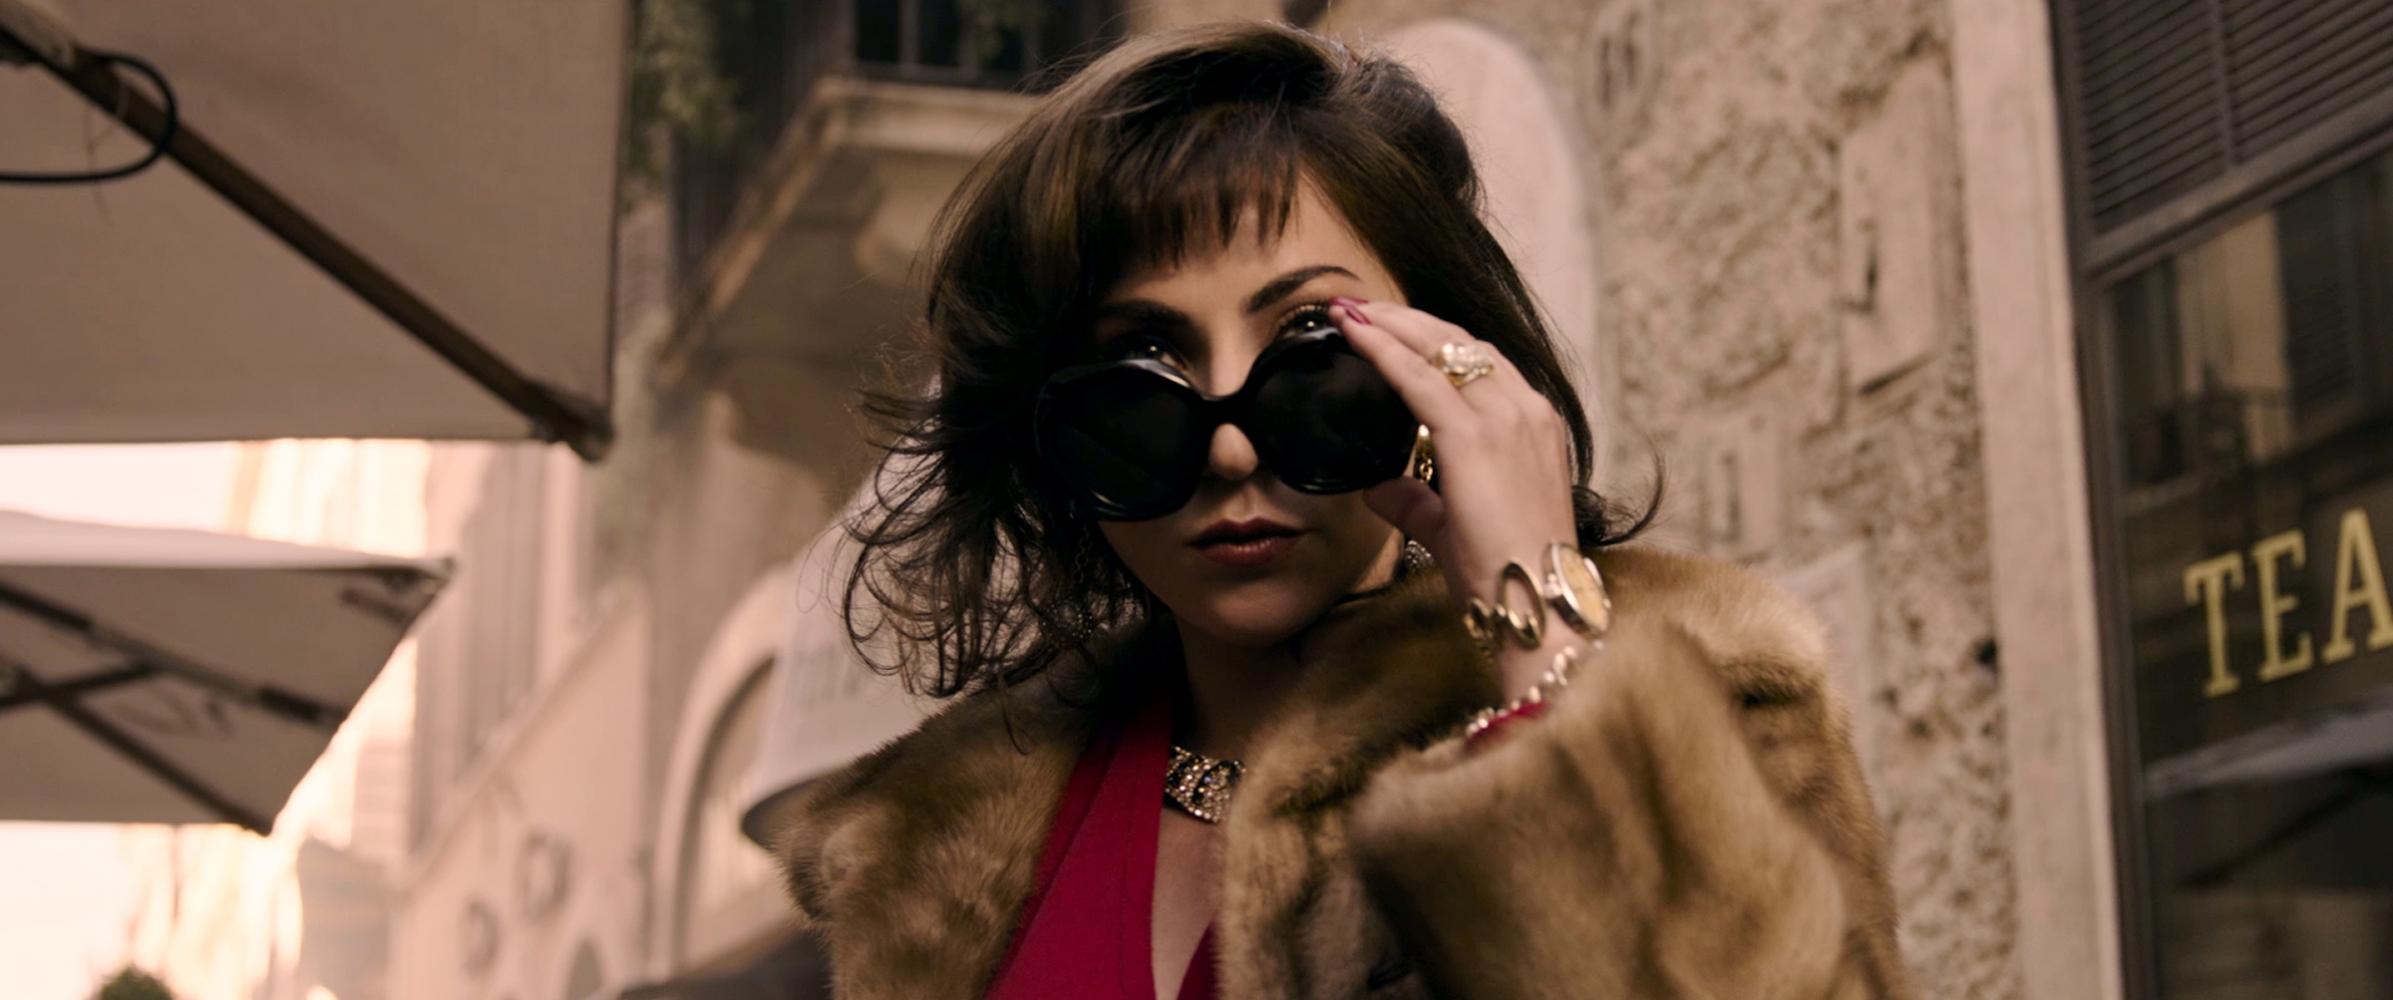 Film-Tipp: House of Gucci